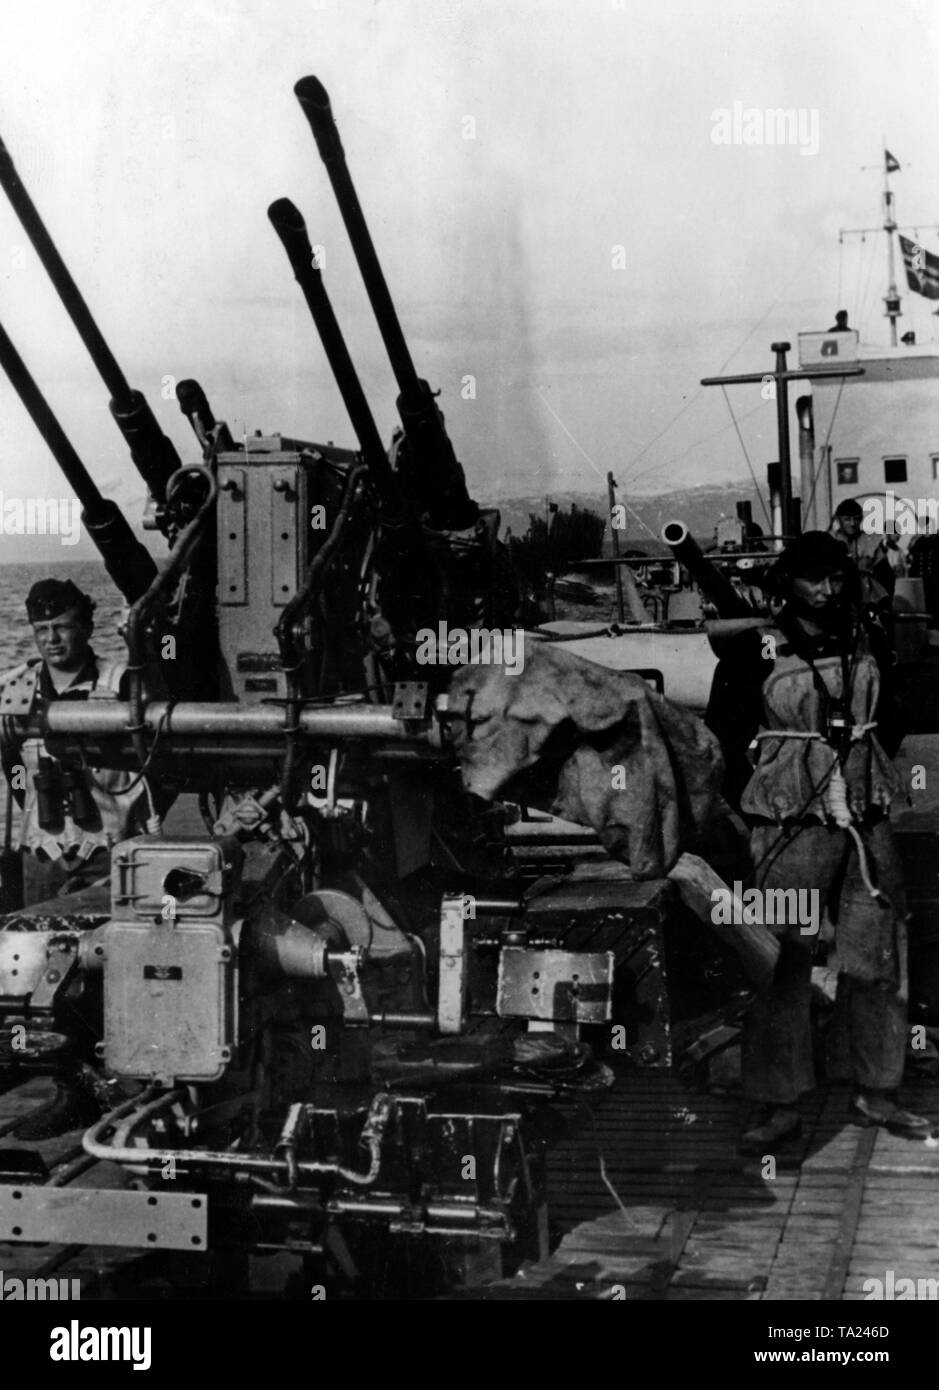 A Flak Vierling 38 2 Cm Flak Vierling 38 On A German Warship In The Arctic Ocean In The Background The Norwegian Coast Photo Of The Propaganda Company Pk War Correspondent Maltry